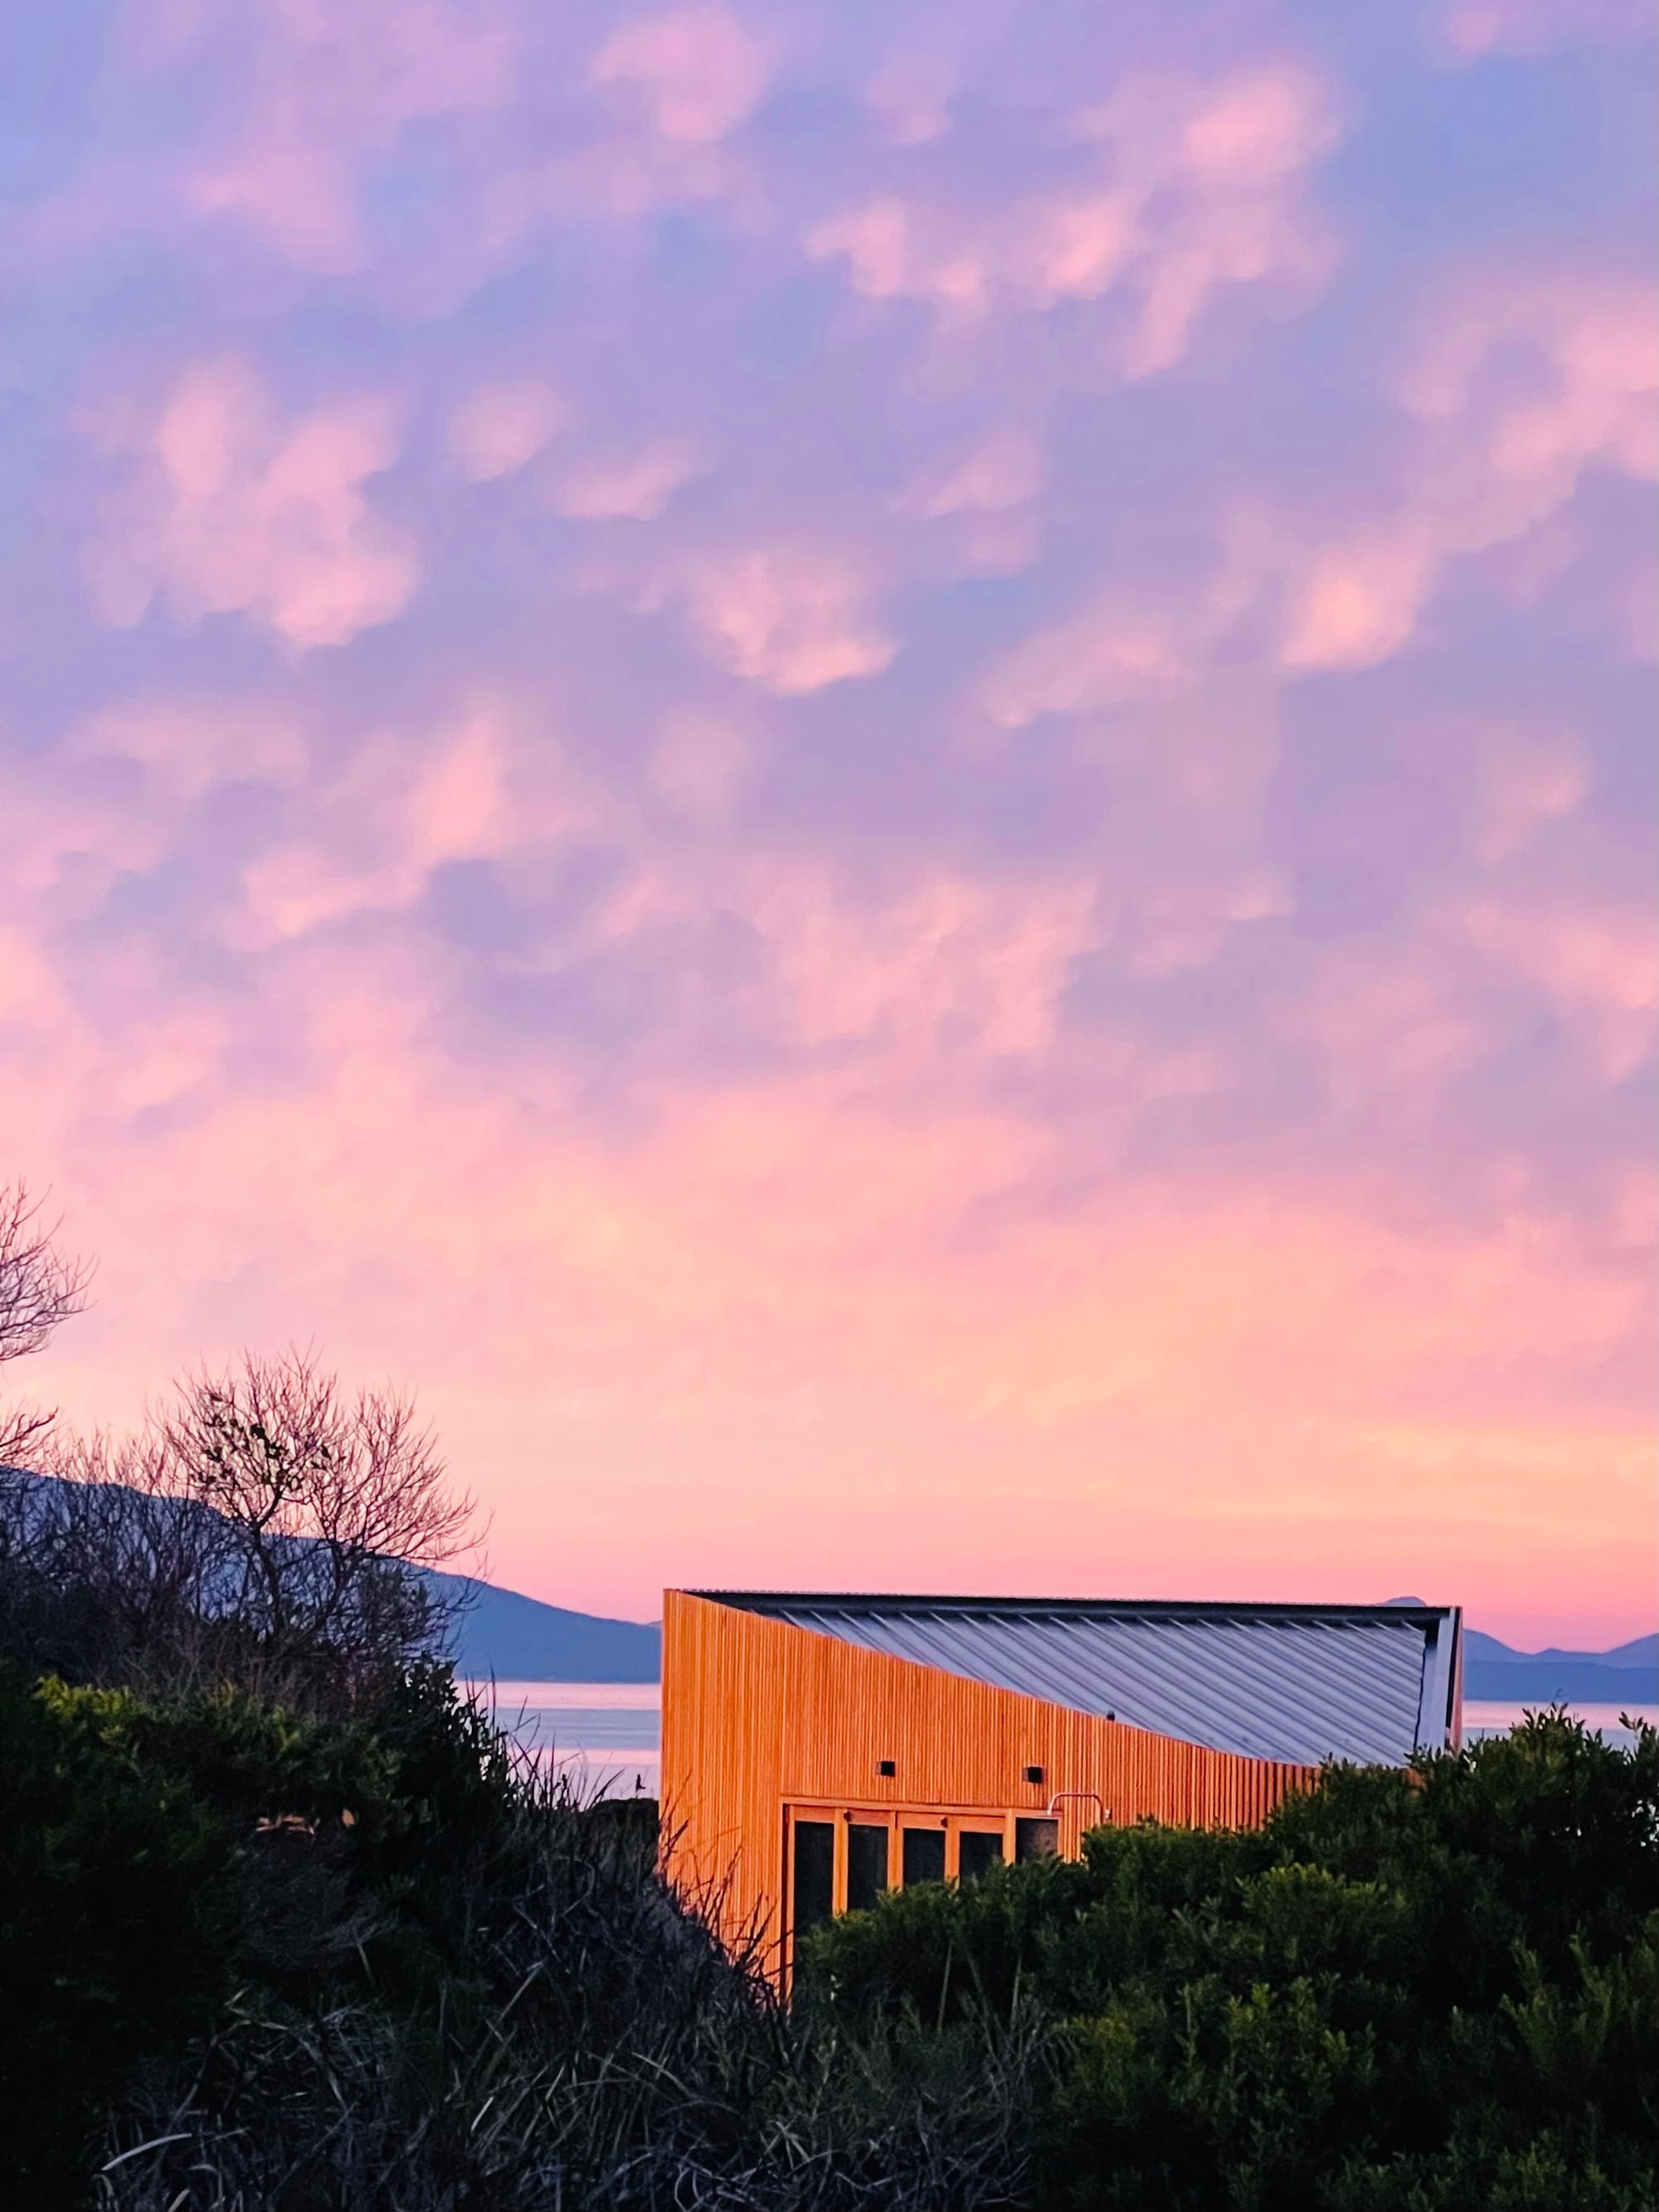 Studio Tasmania in Dolphin Sands, Tasmania. The studio captured at either dawn or dusk, as the sky above transitions through a palette of soft pinks and purples. The silhouette of the building is framed against the calming pastel sky, reflecting the peaceful isolation of the setting by the ocean's edge.